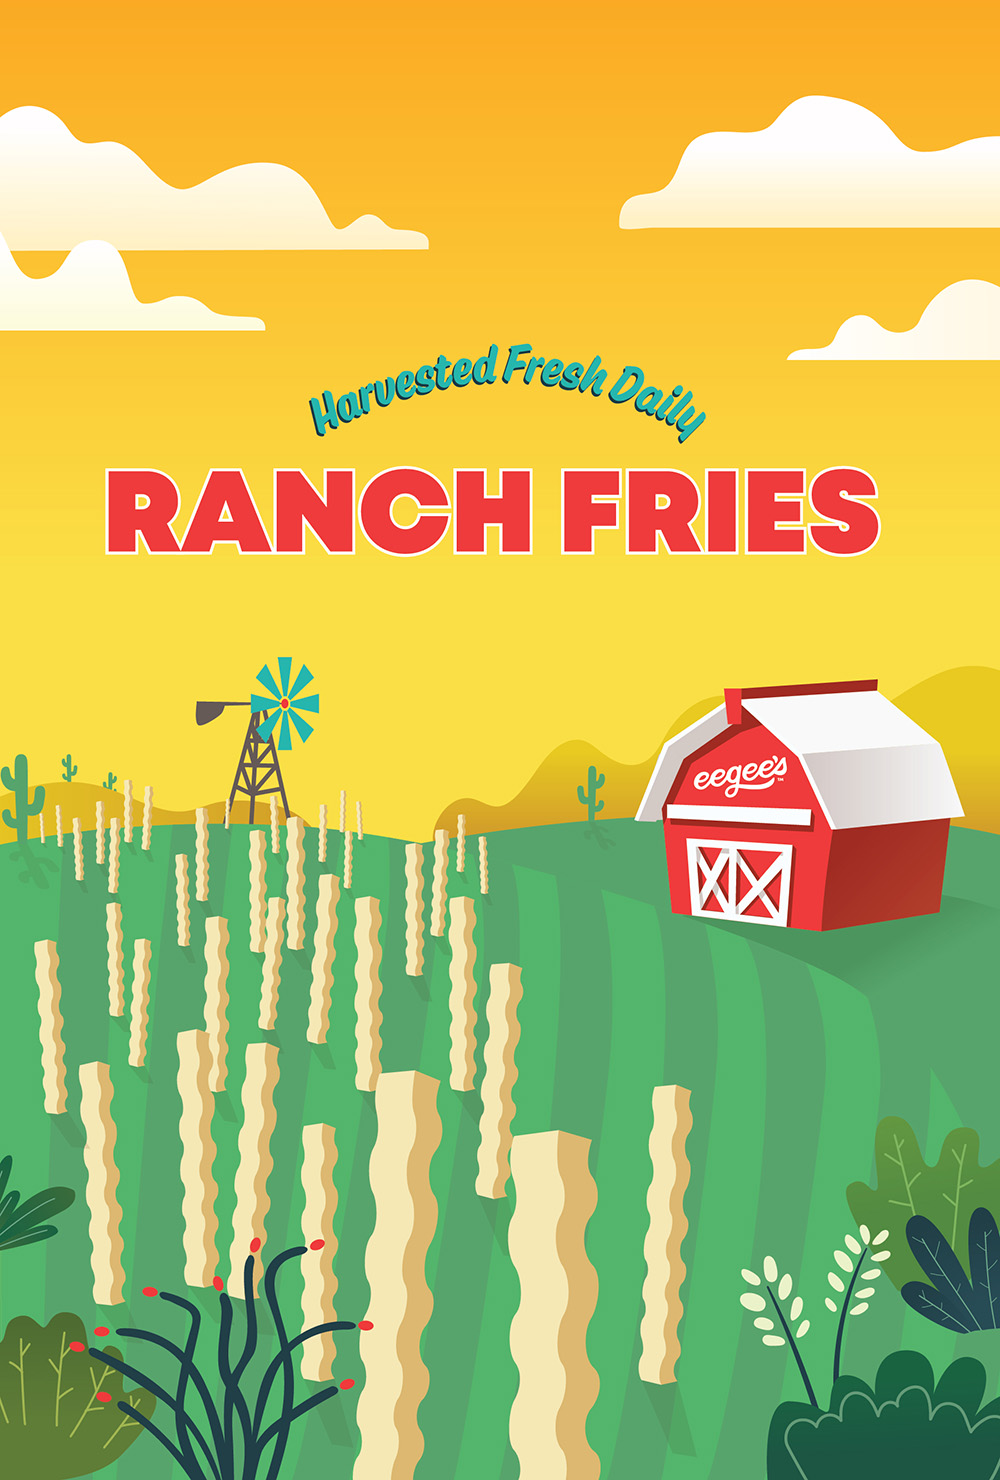 Poster of a cartoon barn and fries